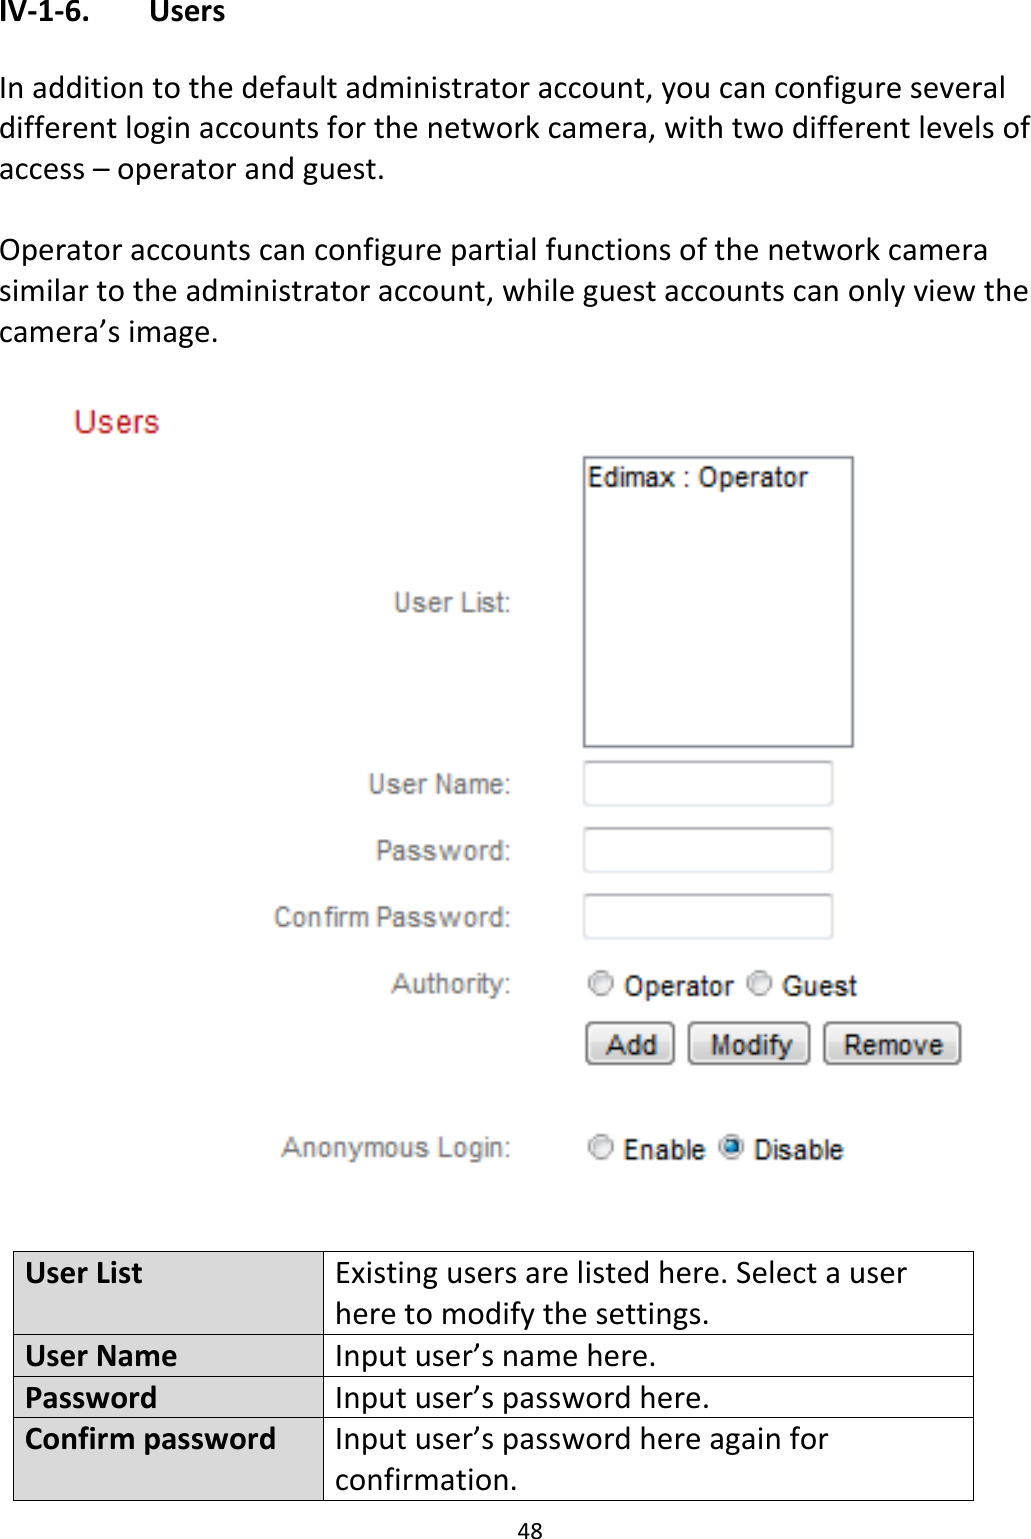 48  IV-1-6.   Users  In addition to the default administrator account, you can configure several different login accounts for the network camera, with two different levels of access – operator and guest.  Operator accounts can configure partial functions of the network camera similar to the administrator account, while guest accounts can only view the camera’s image.    User List Existing users are listed here. Select a user here to modify the settings. User Name Input user’s name here. Password Input user’s password here. Confirm password  Input user’s password here again for confirmation. 